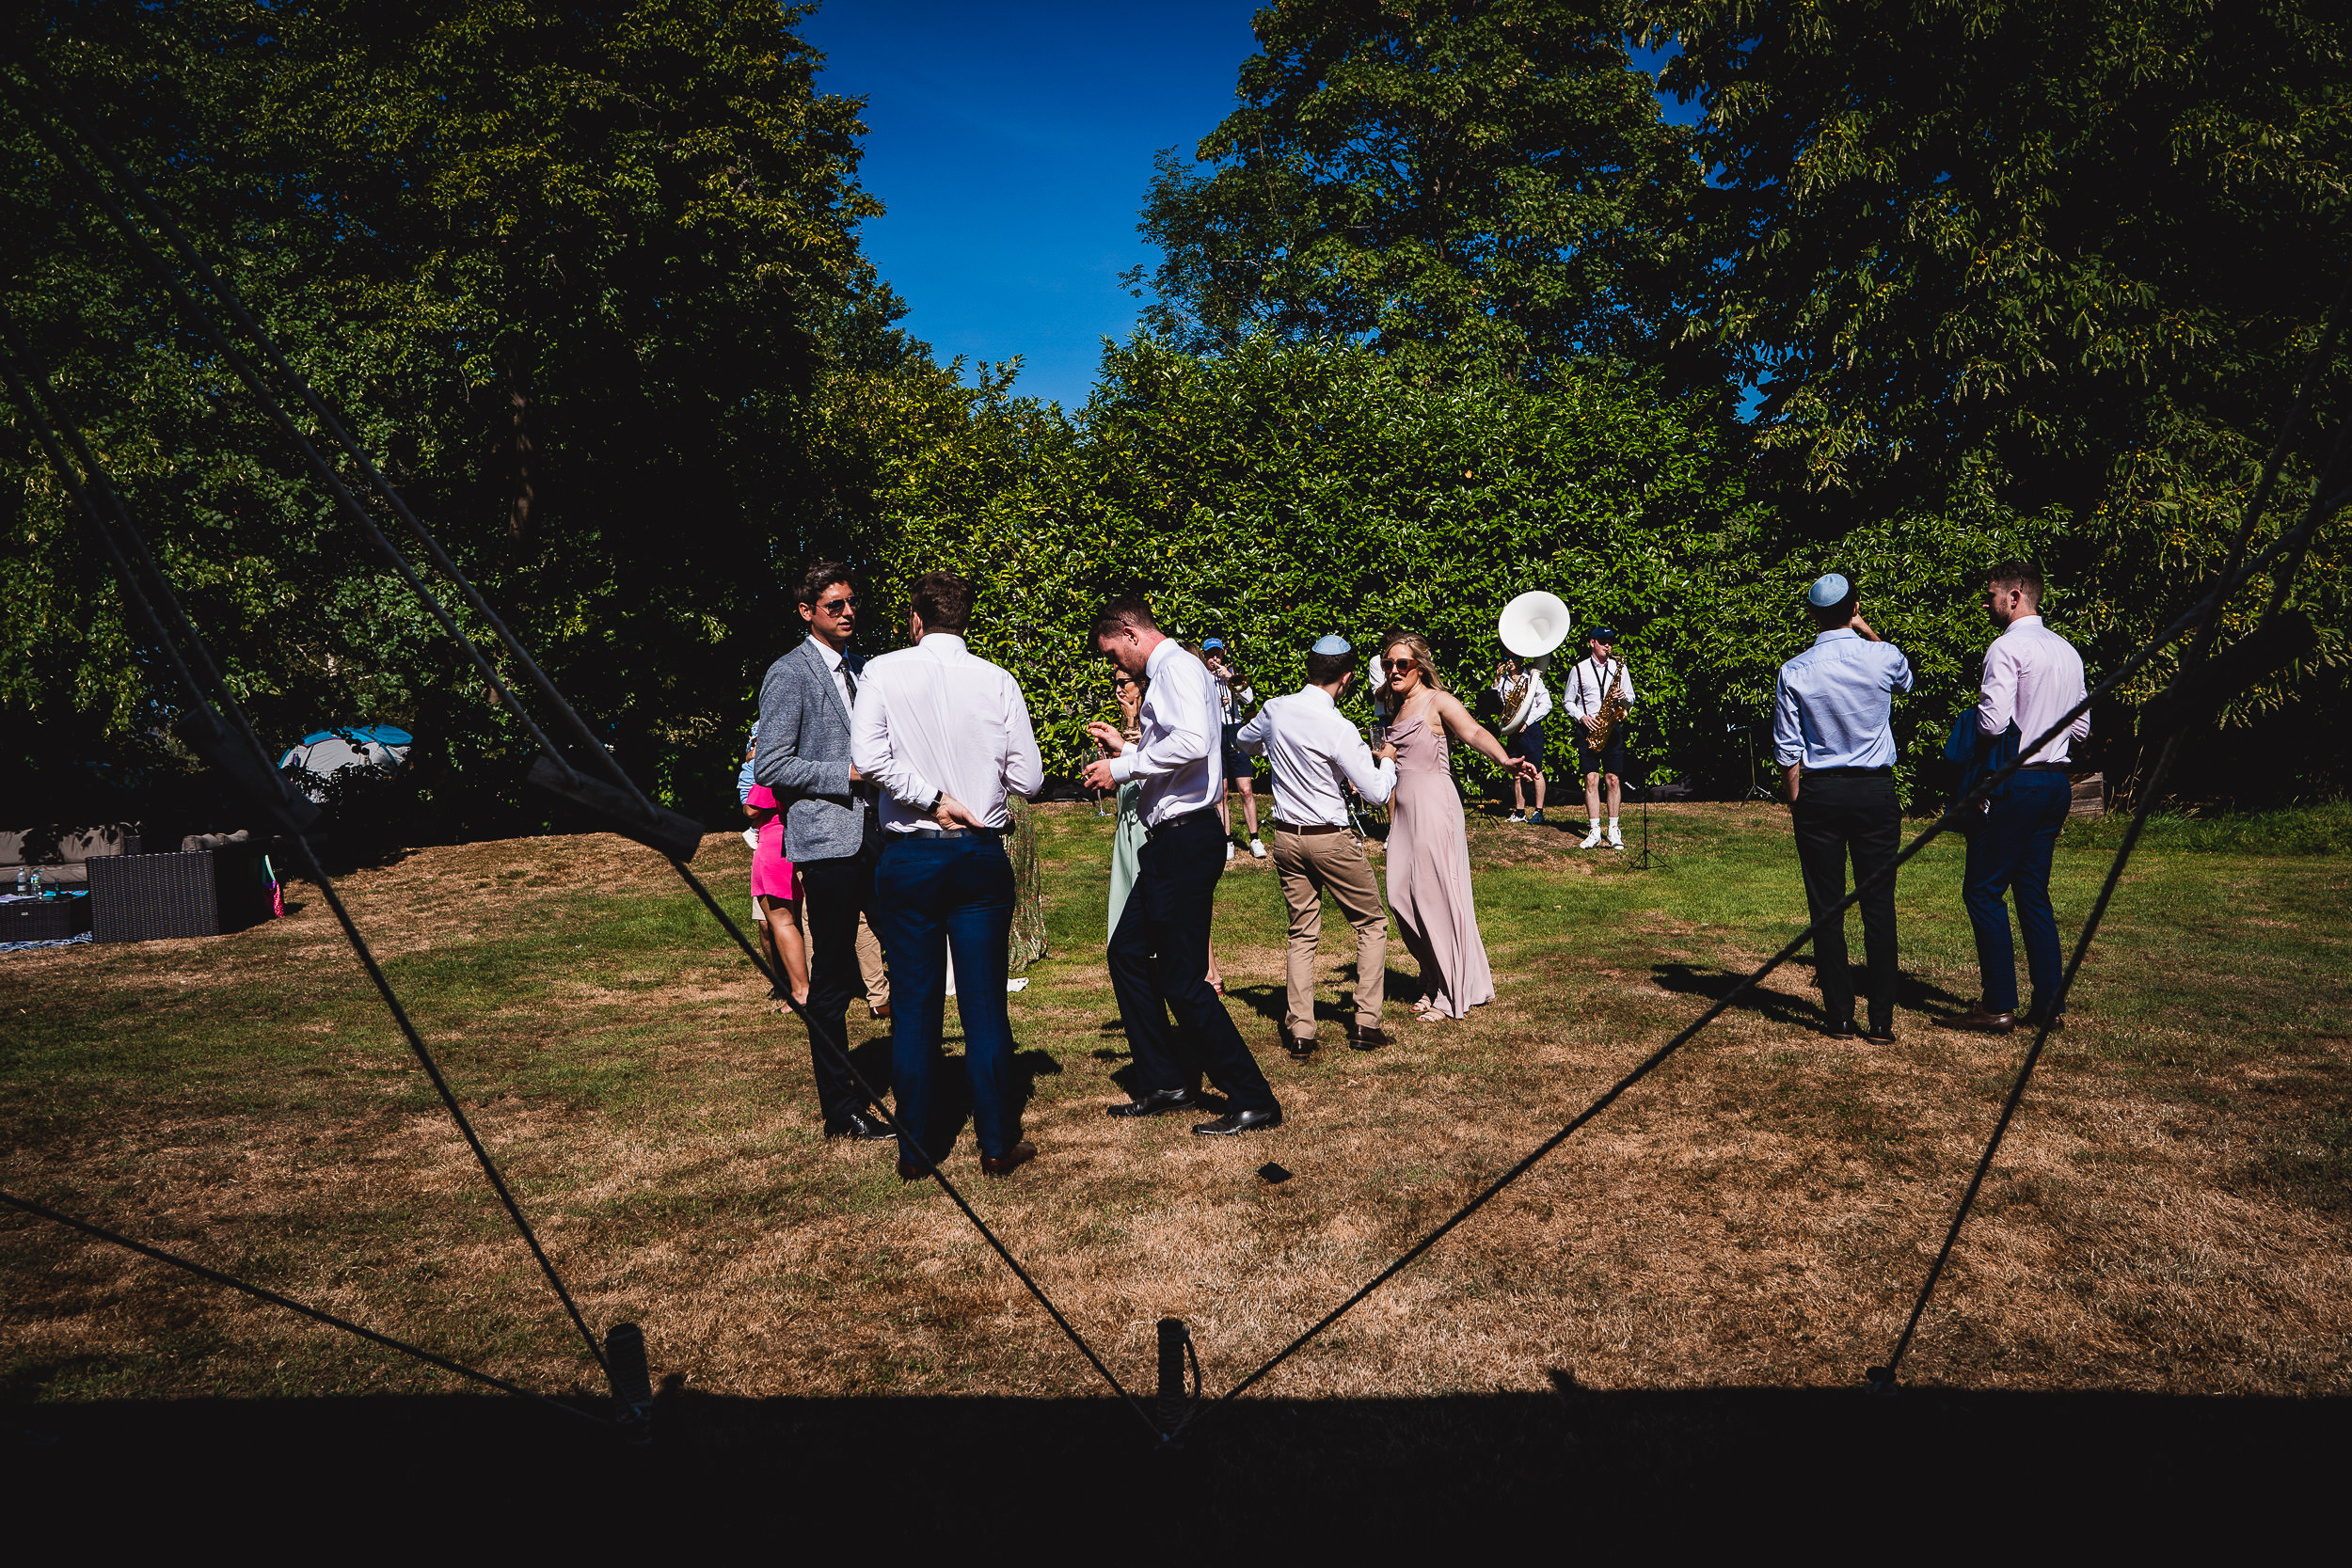 A group of people posing for a wedding photo in a grassy area.